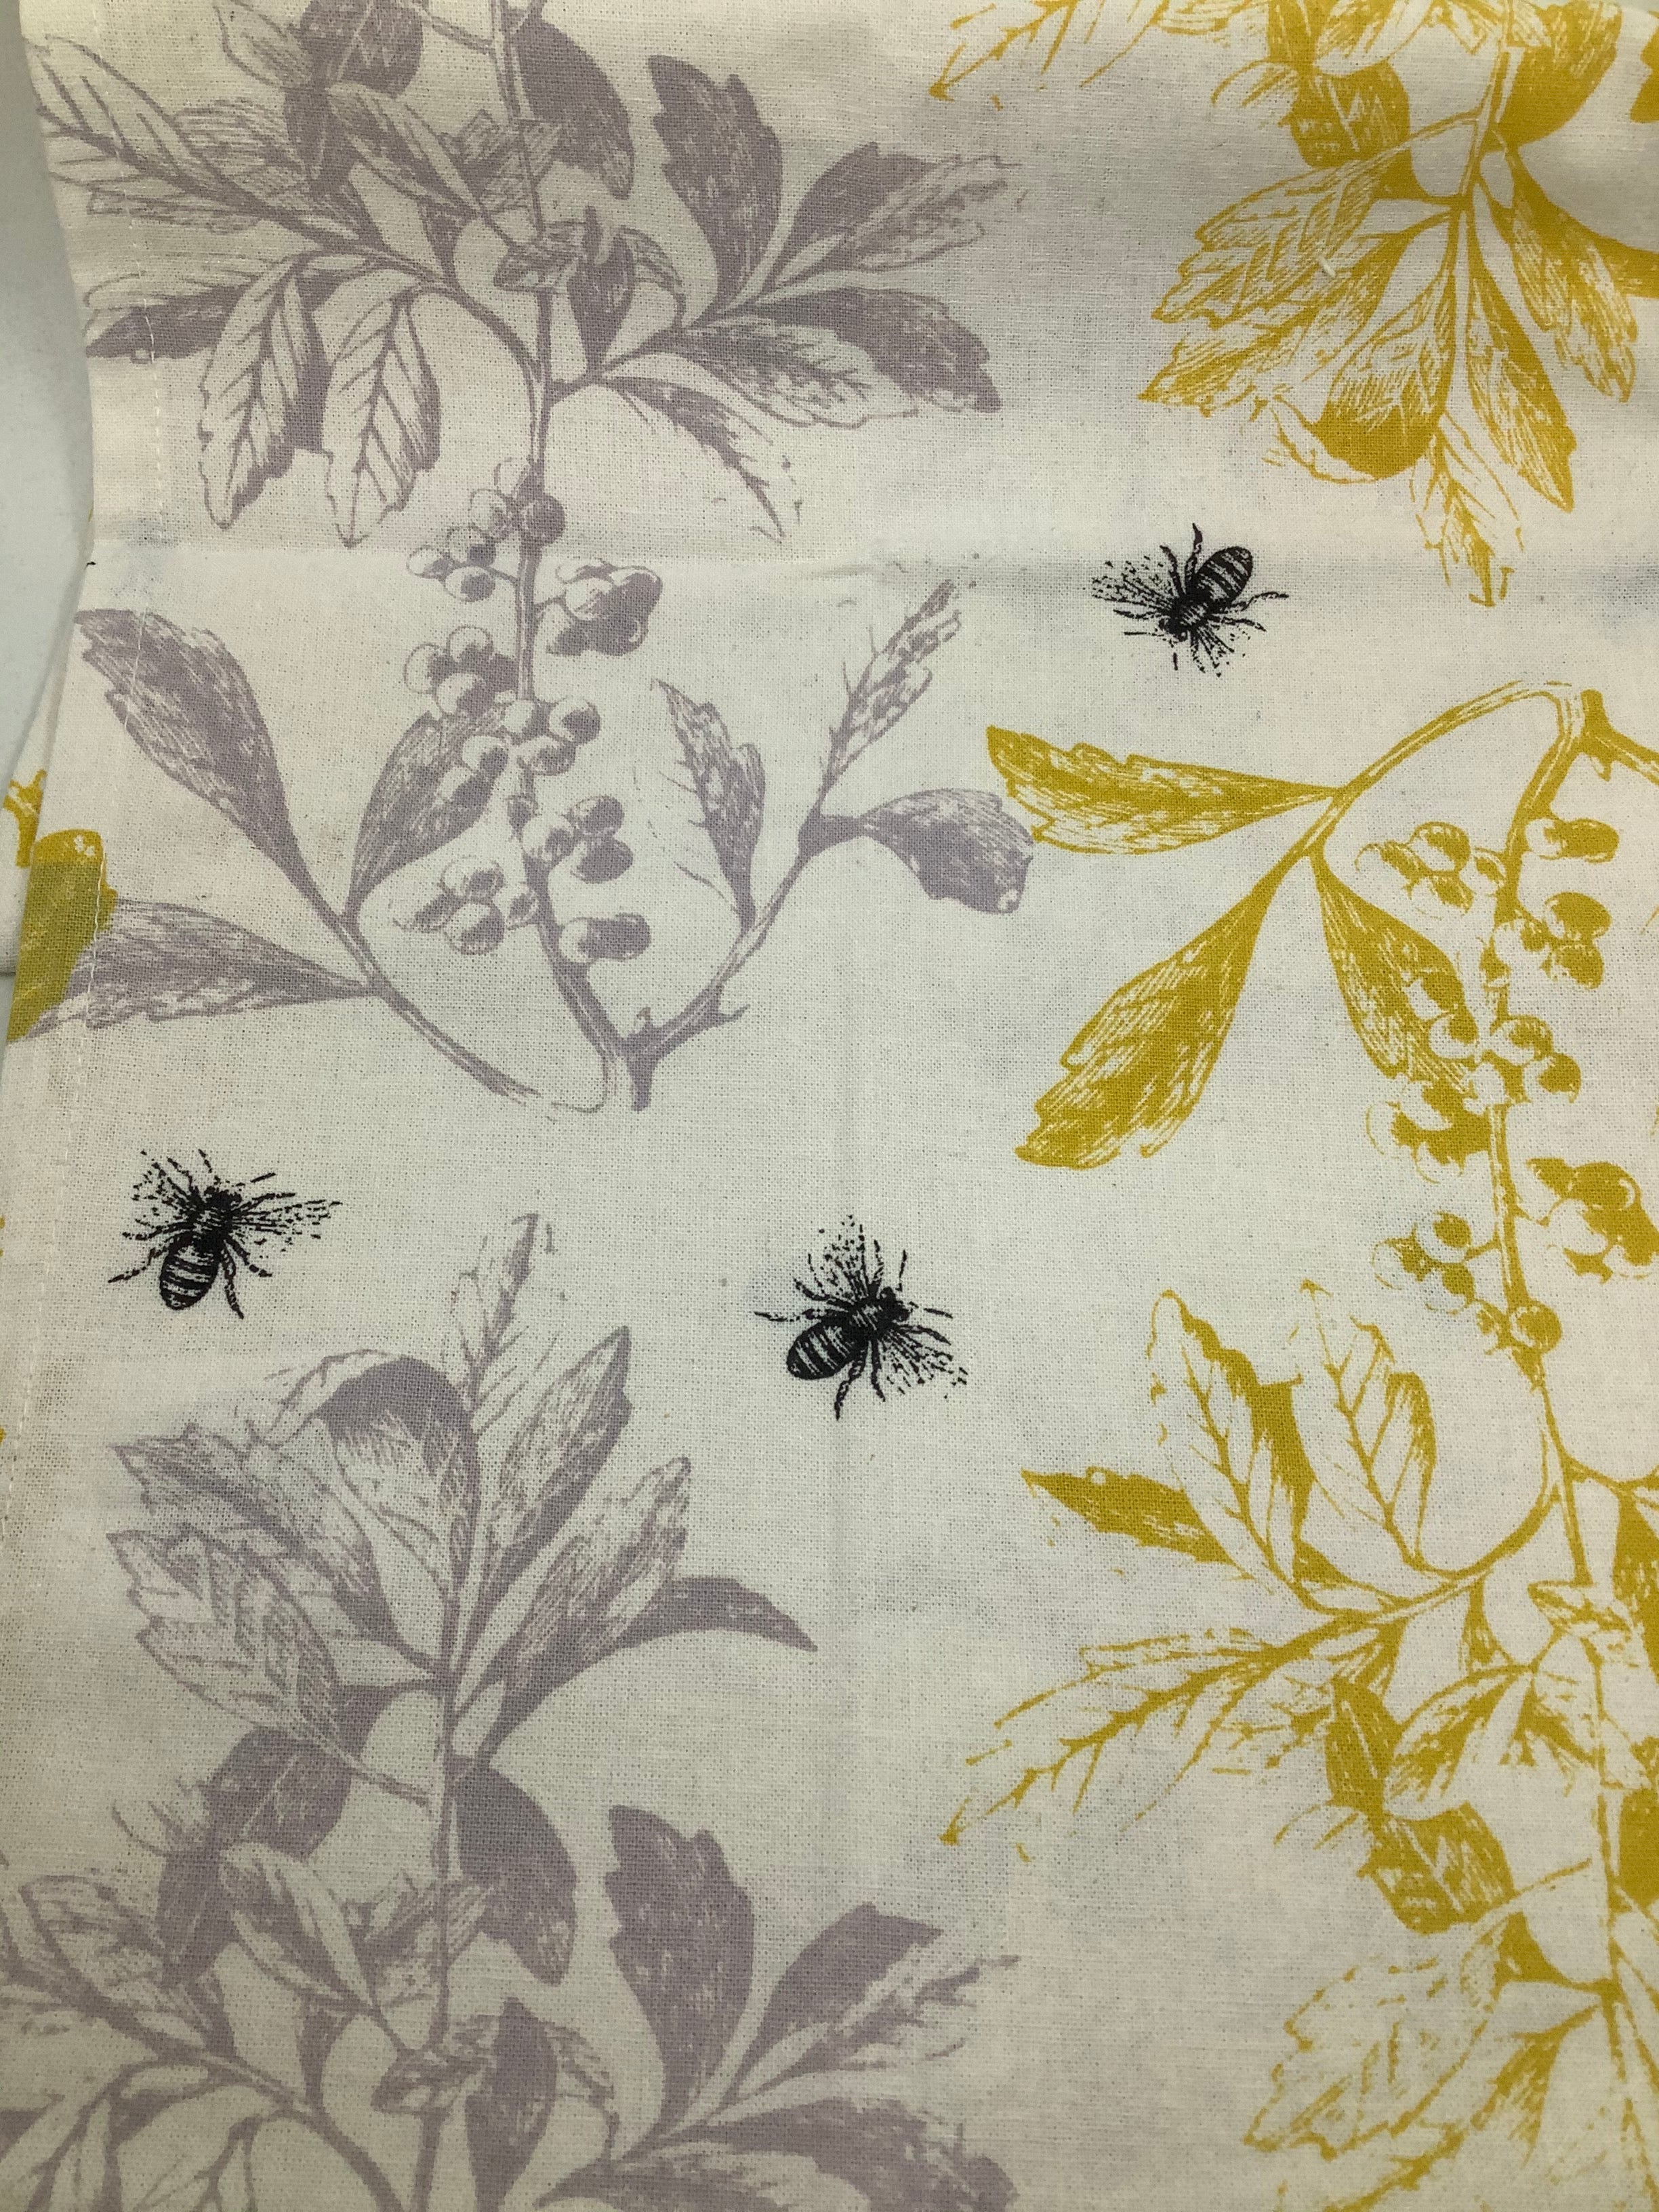 Table Cloth - Bees 60 x 90